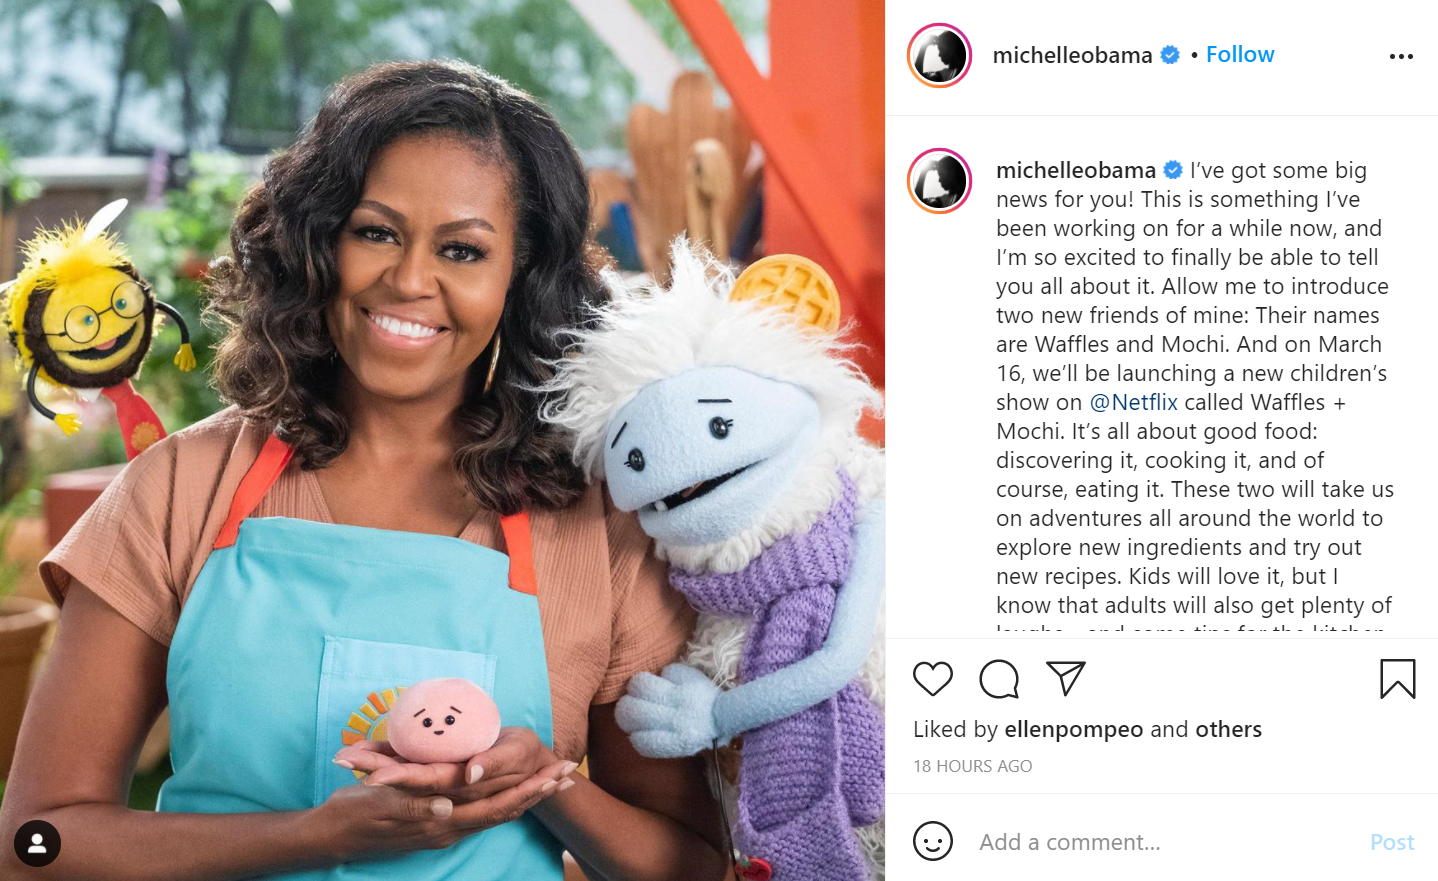 Michelle Obama Stars In Waffles Mochi Cooking Show On Netflix